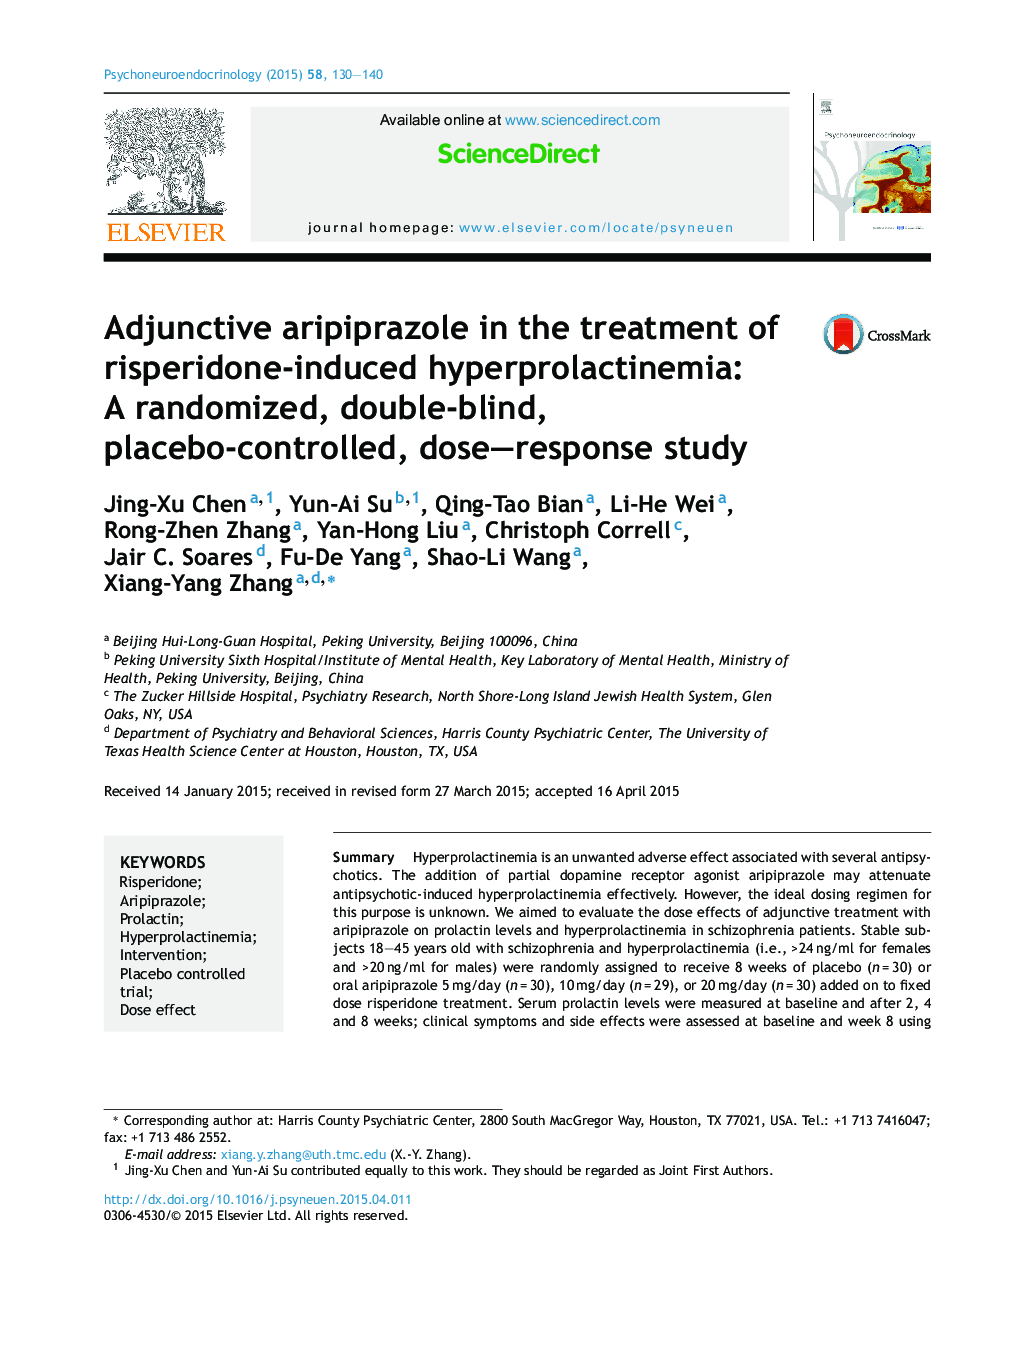 Adjunctive aripiprazole in the treatment of risperidone-induced hyperprolactinemia: A randomized, double-blind, placebo-controlled, dose–response study